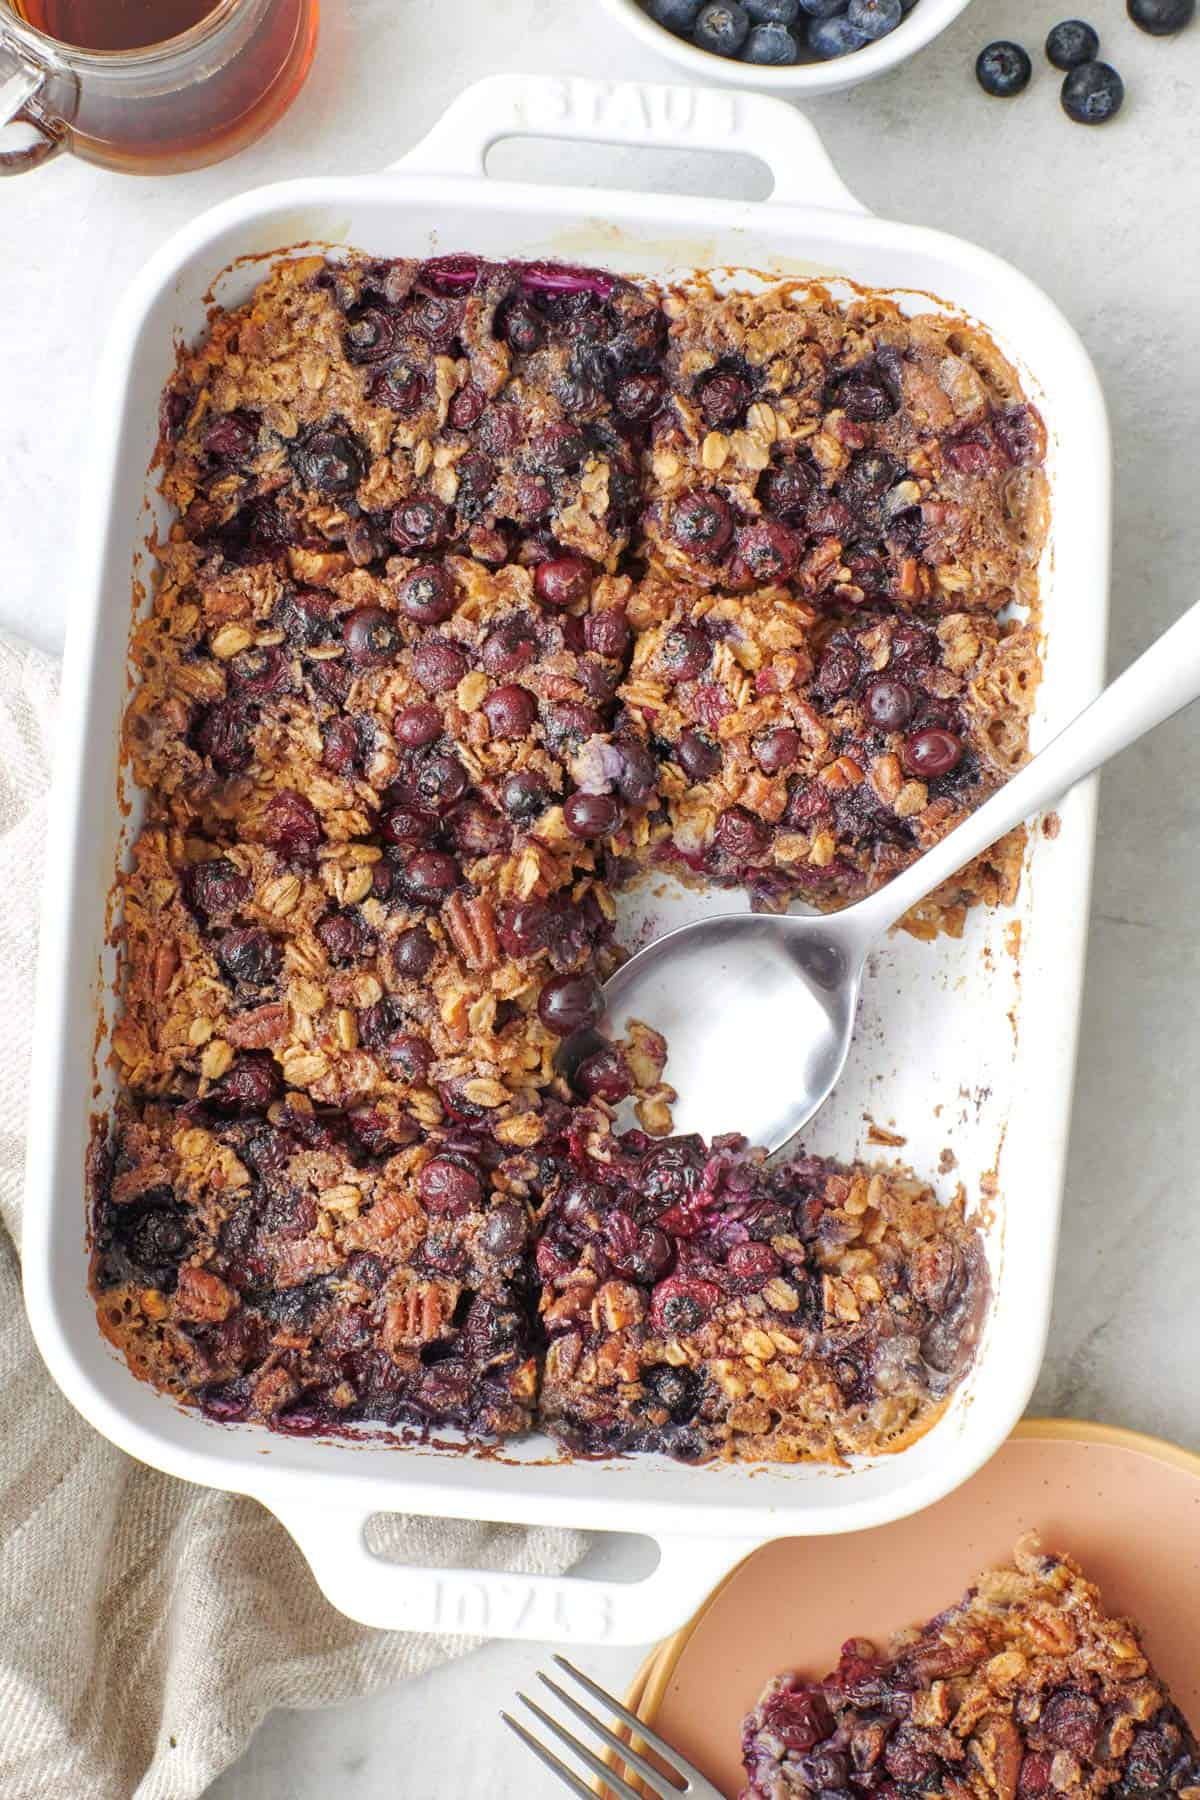 https://feelgoodfoodie.net/wp-content/uploads/2023/04/Blueberry-Baked-Oatmeal-08.jpg